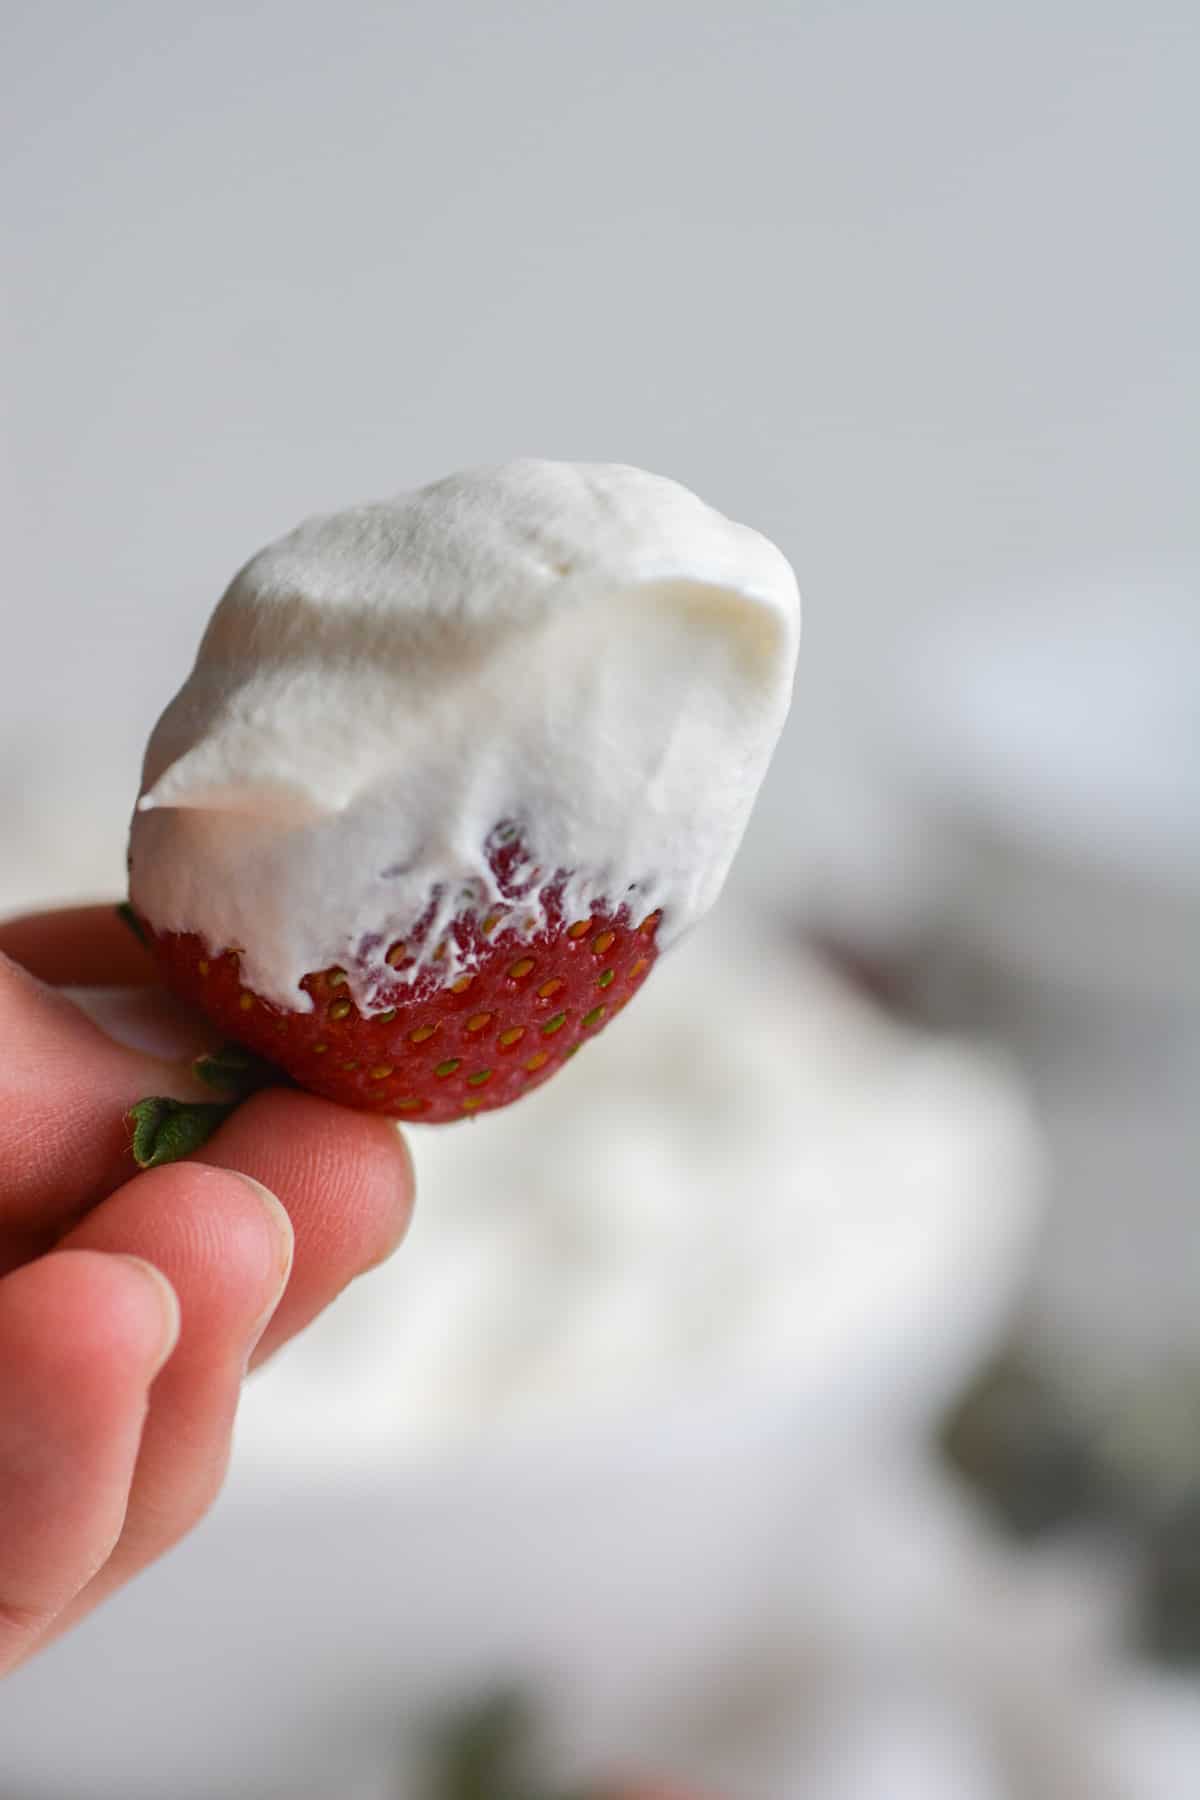 Strawberry dipped in whipped cream frosting